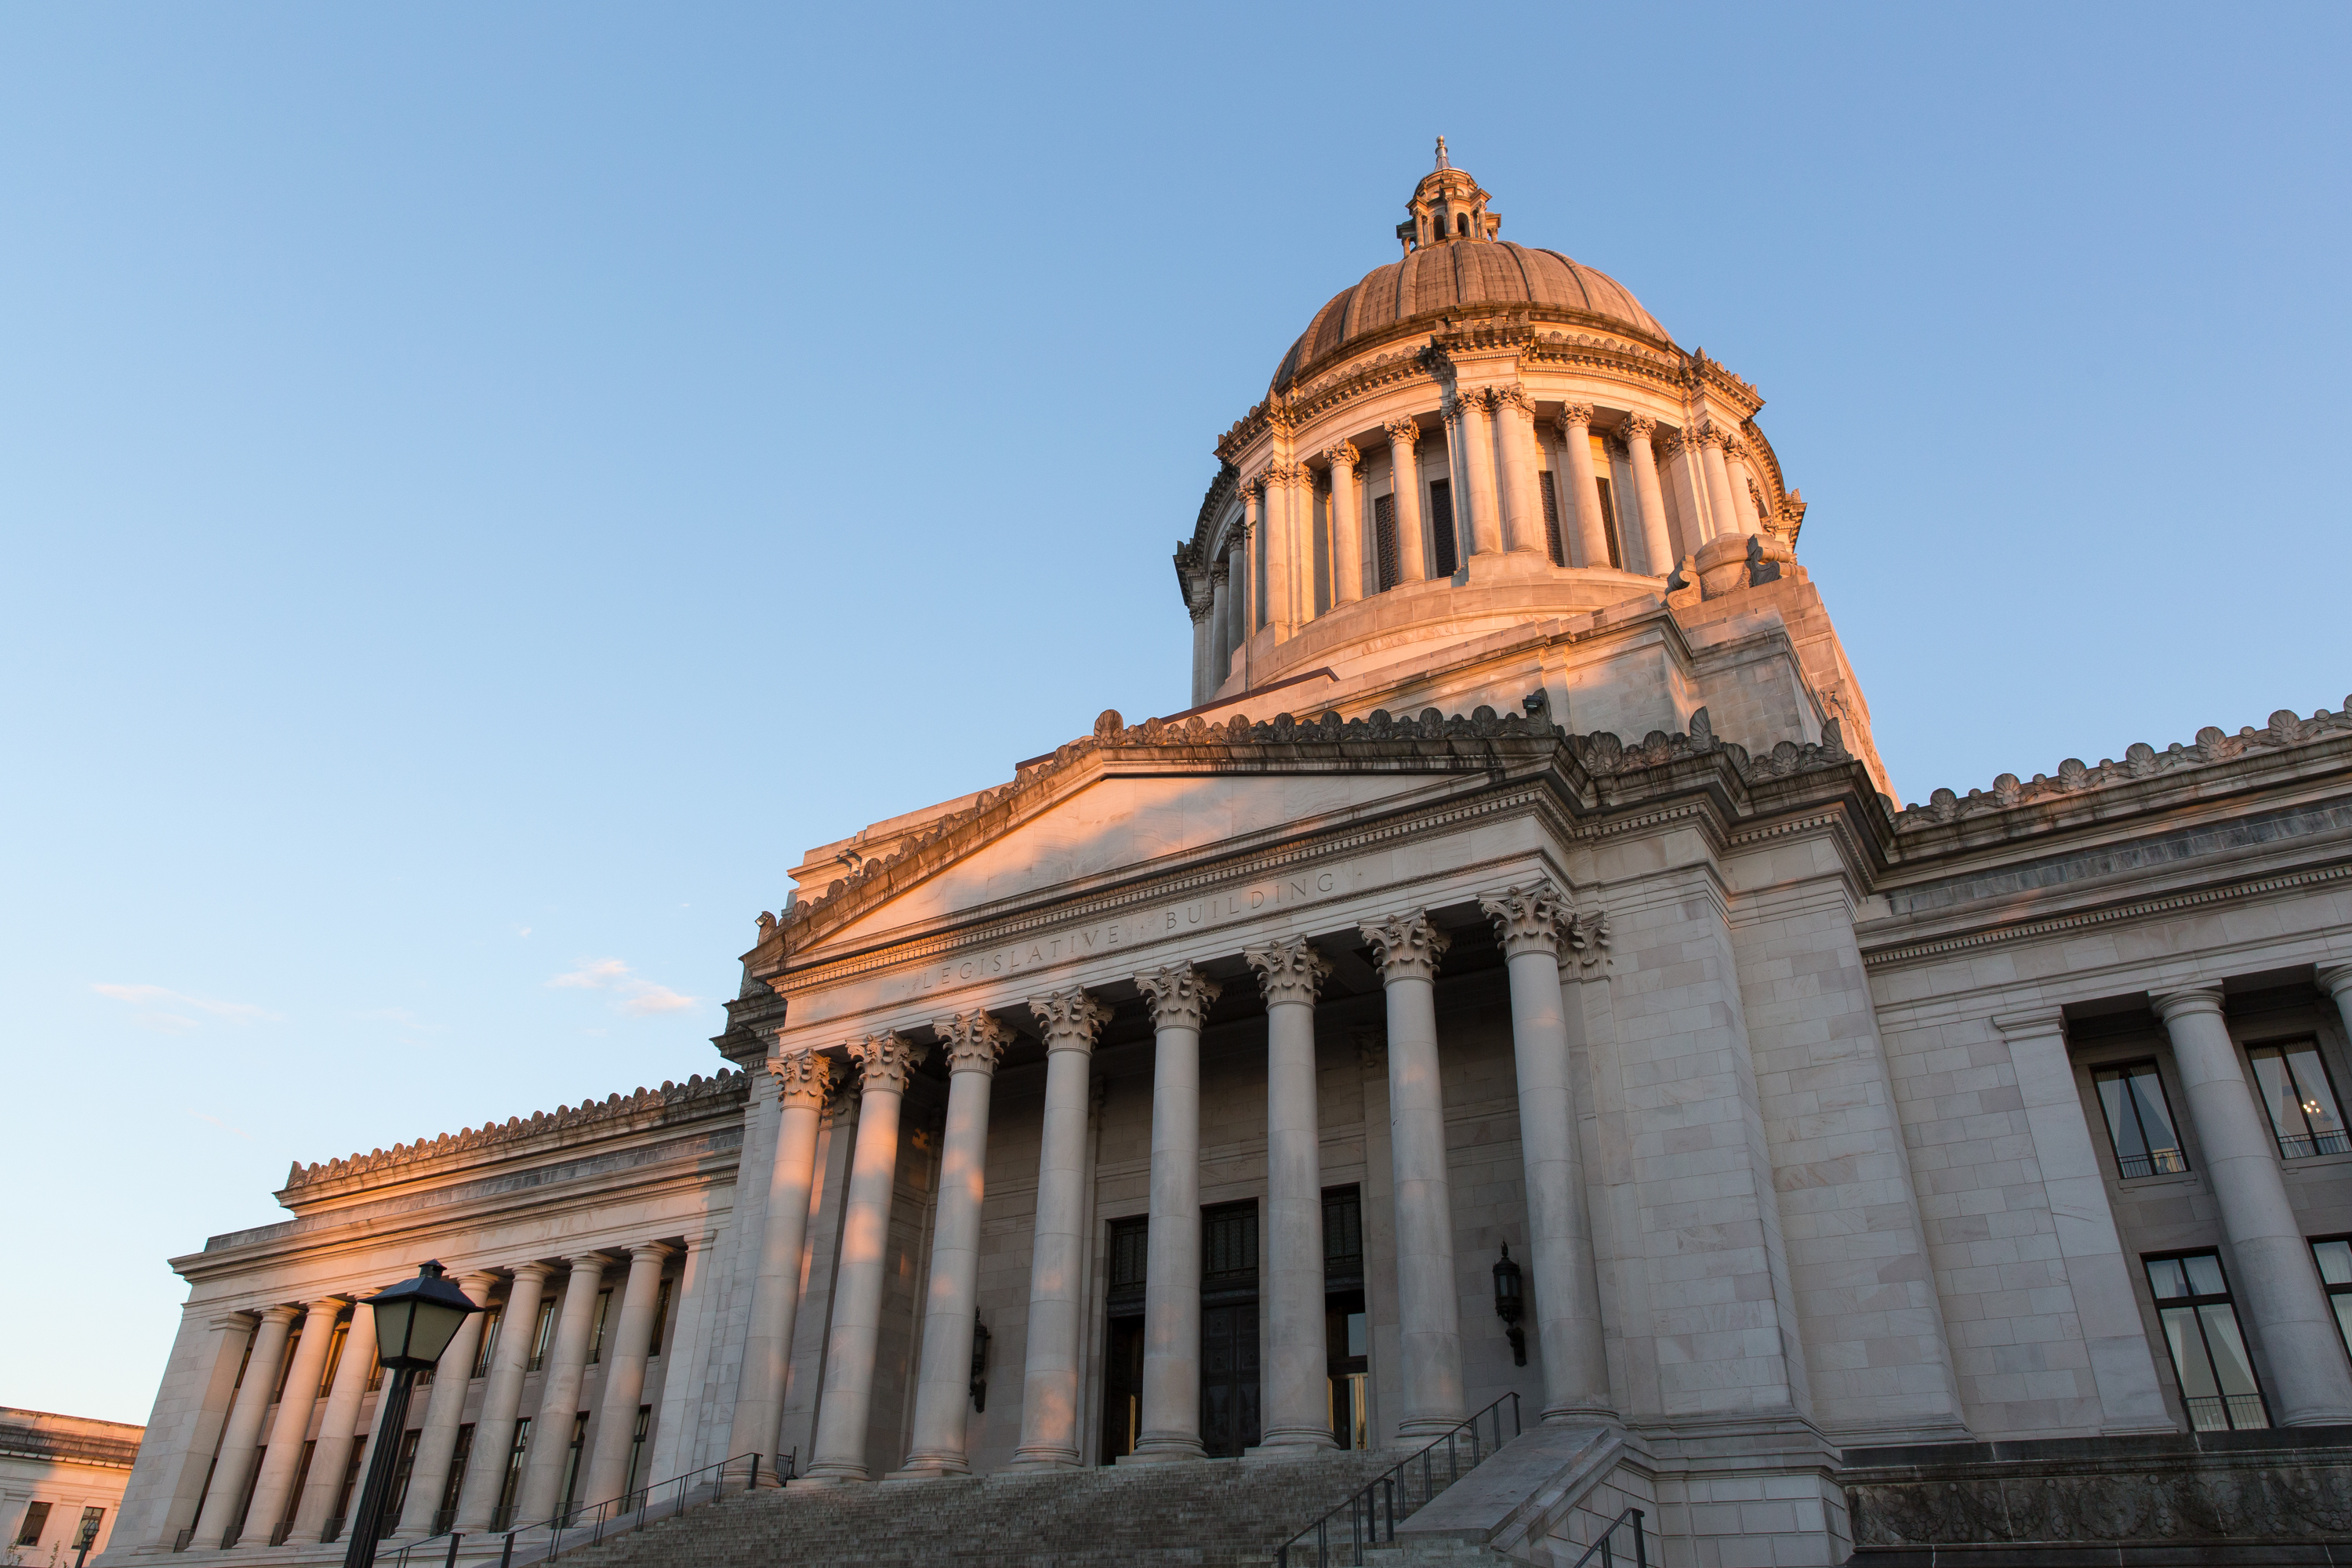 This Week in Olympia 8/26-8/29: Legislature Sues Gov, Eastern WA Worries About Fire and Water, and Prison Problems